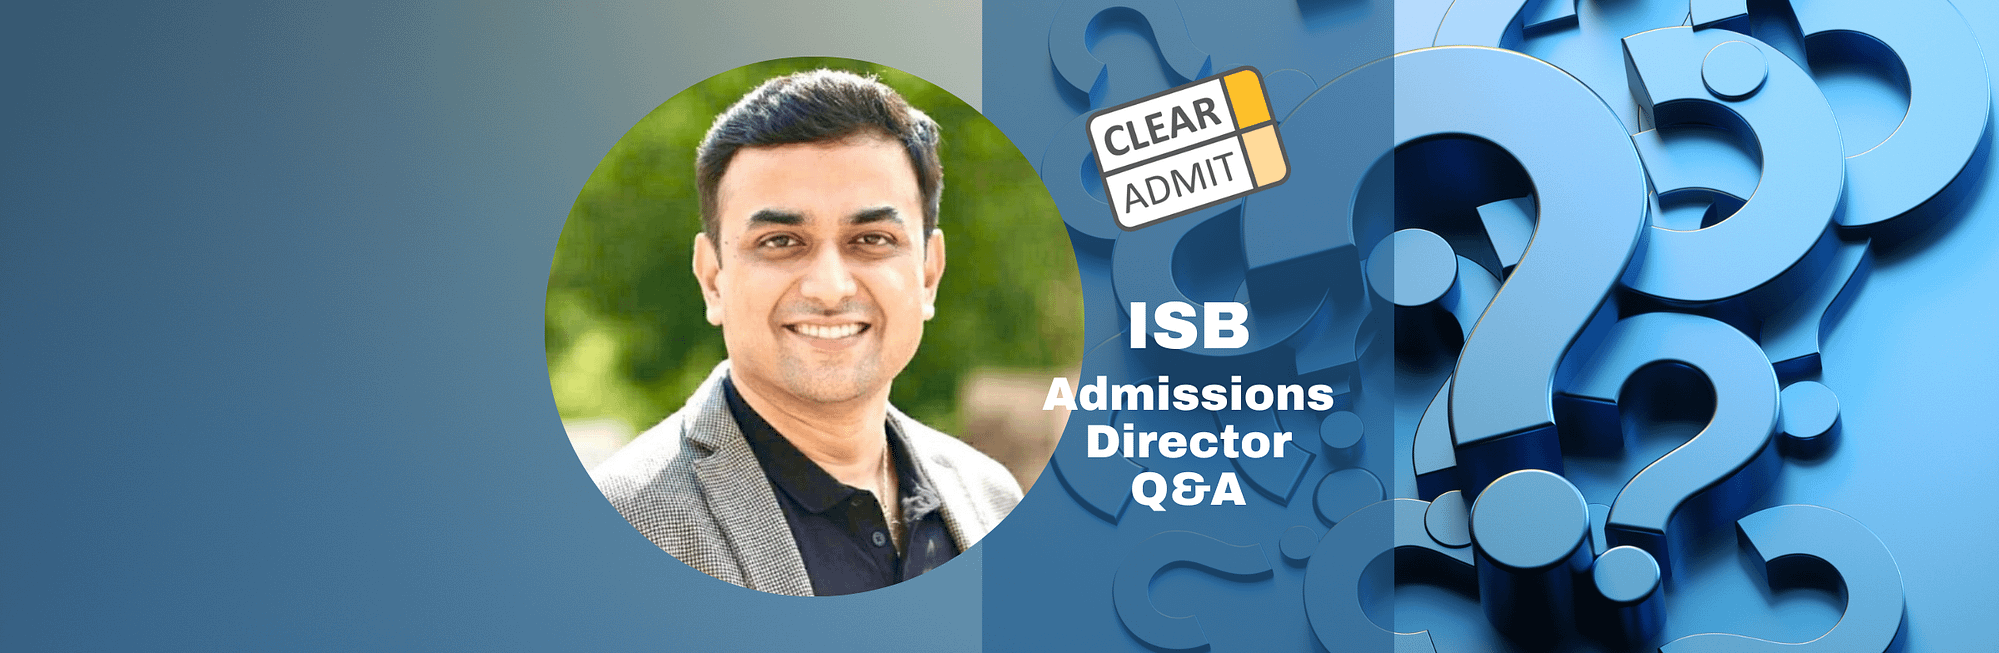 isb pgp admissions